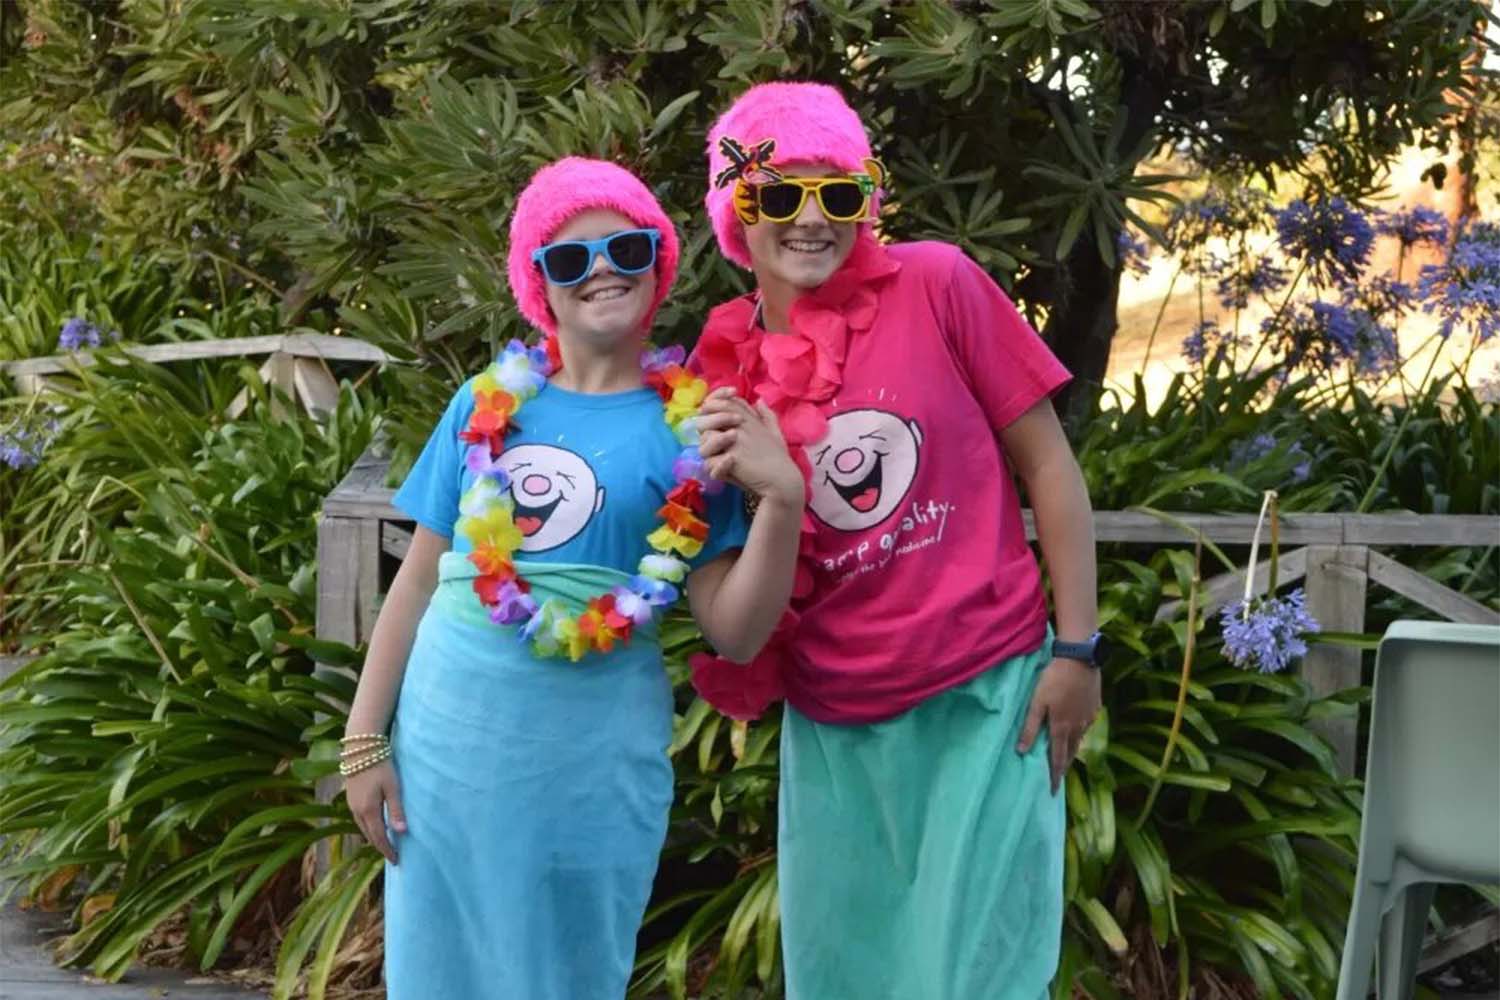 Two girls in matching pink wigs and mermaid tails towels smile